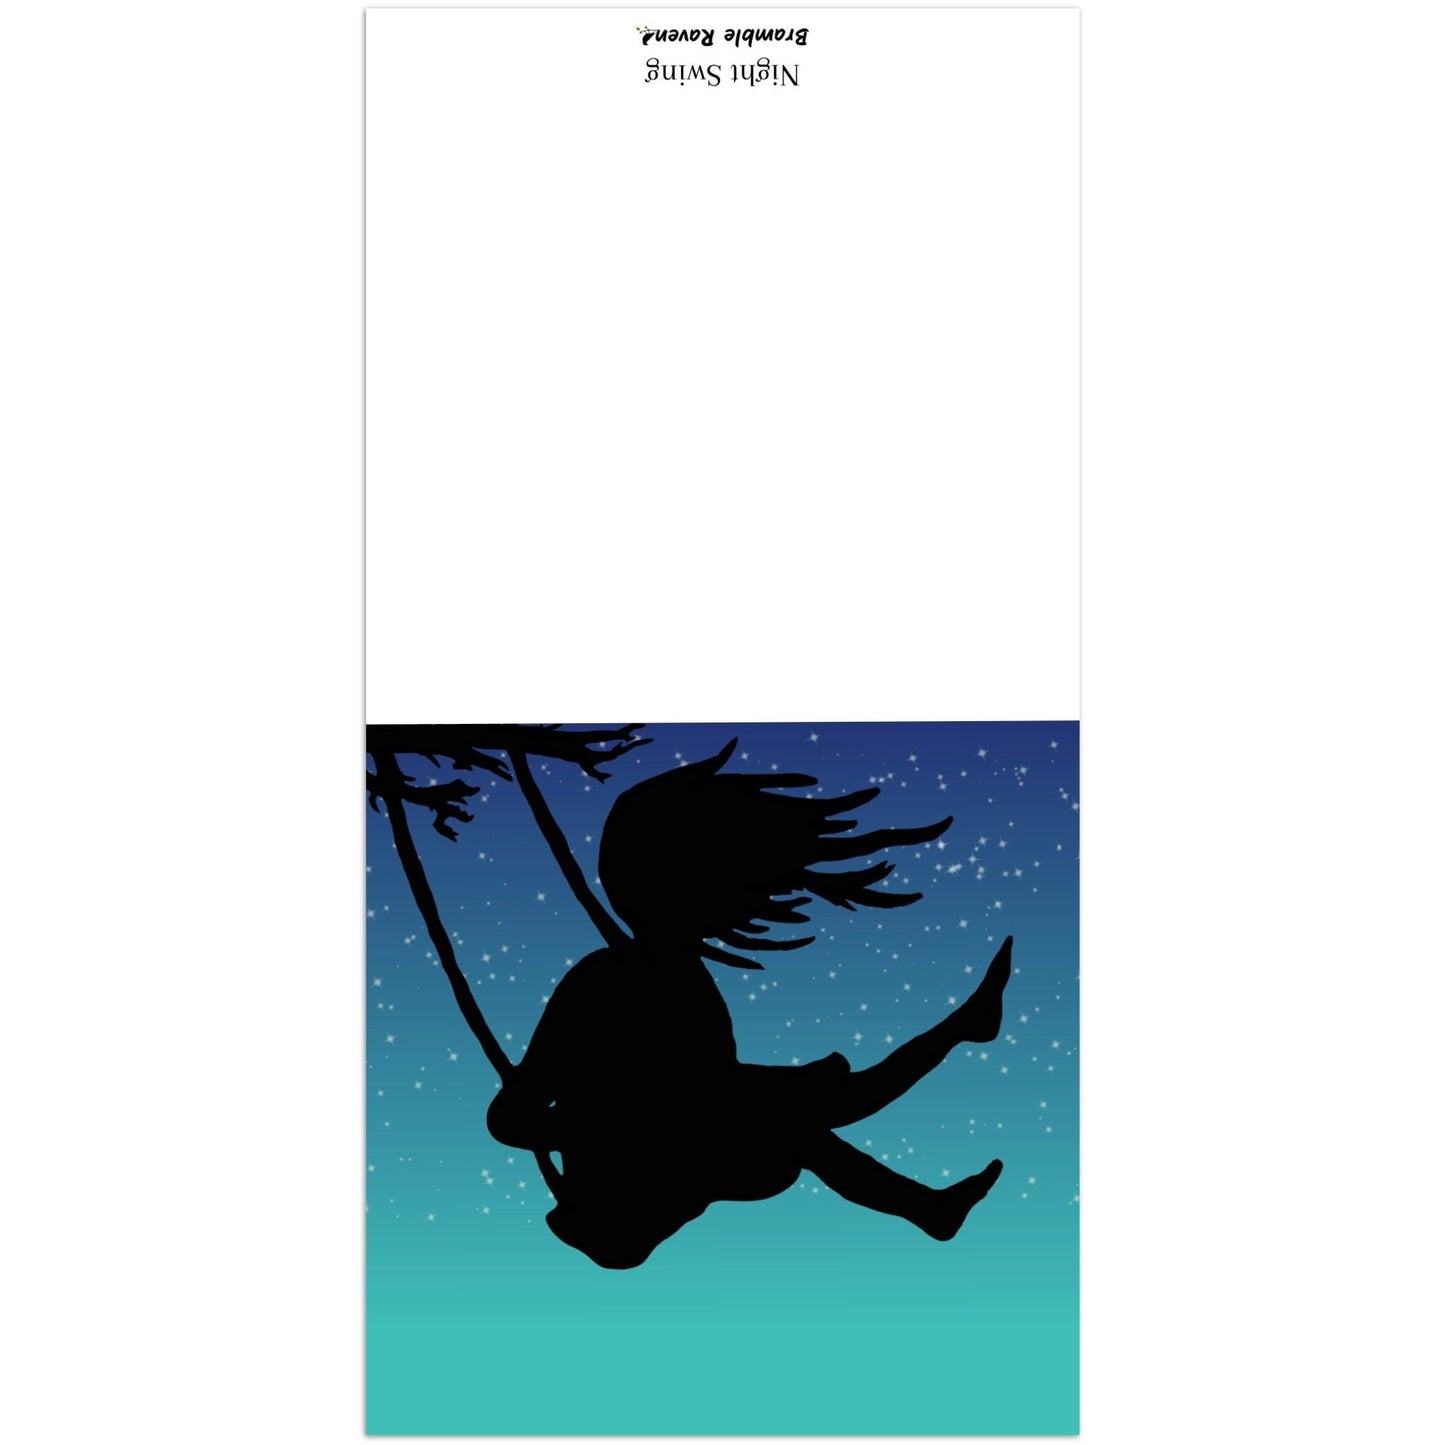 Pack of ten 5.25 by 5.25 inch Night Swing greeting cards and envelopes. Front shows silhouette of a girl in a tree swing against a starry summer night sky. Inside is blank. 